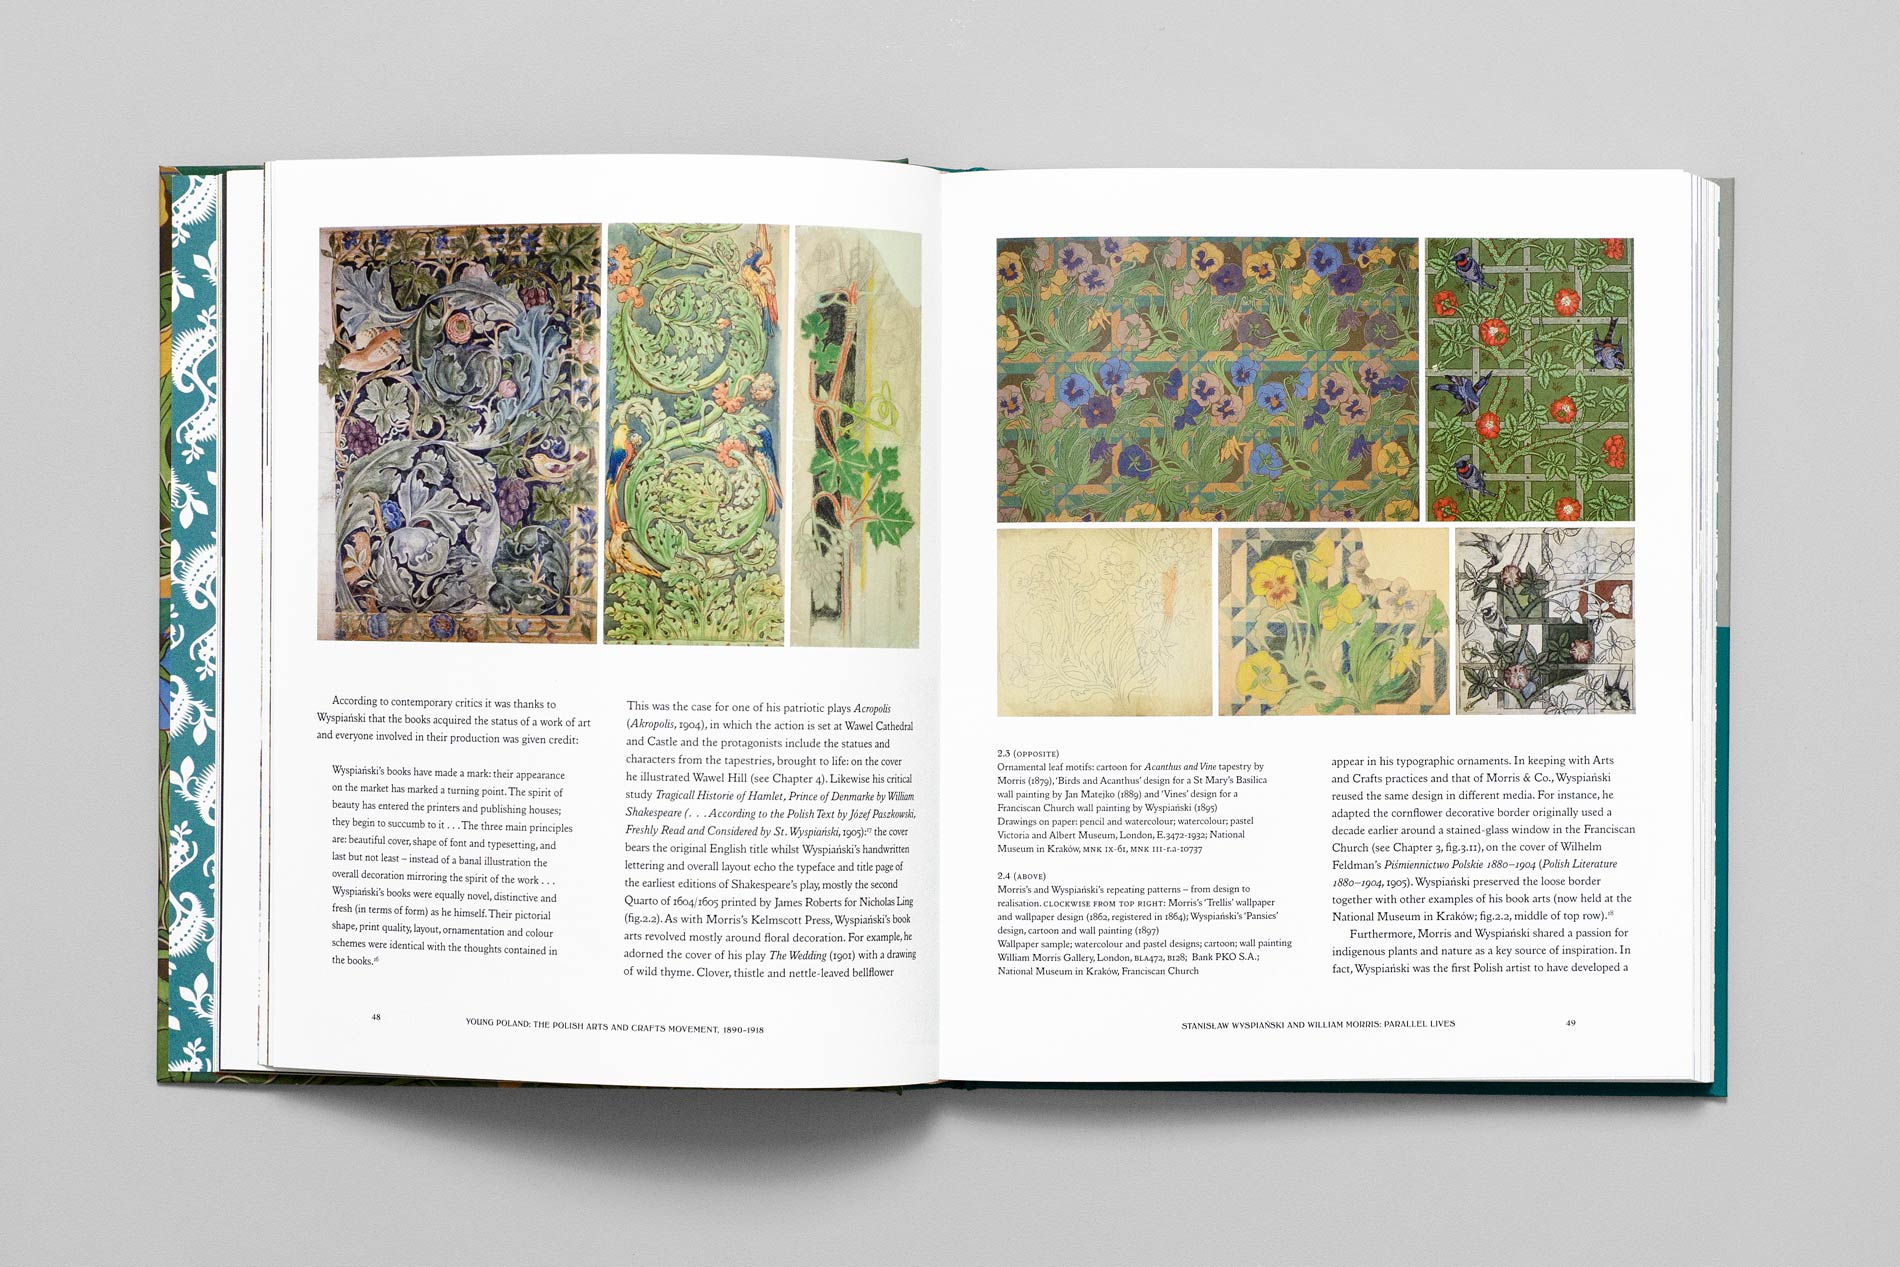 Young Poland: The Polish Arts and Crafts Movement, 1890–1918